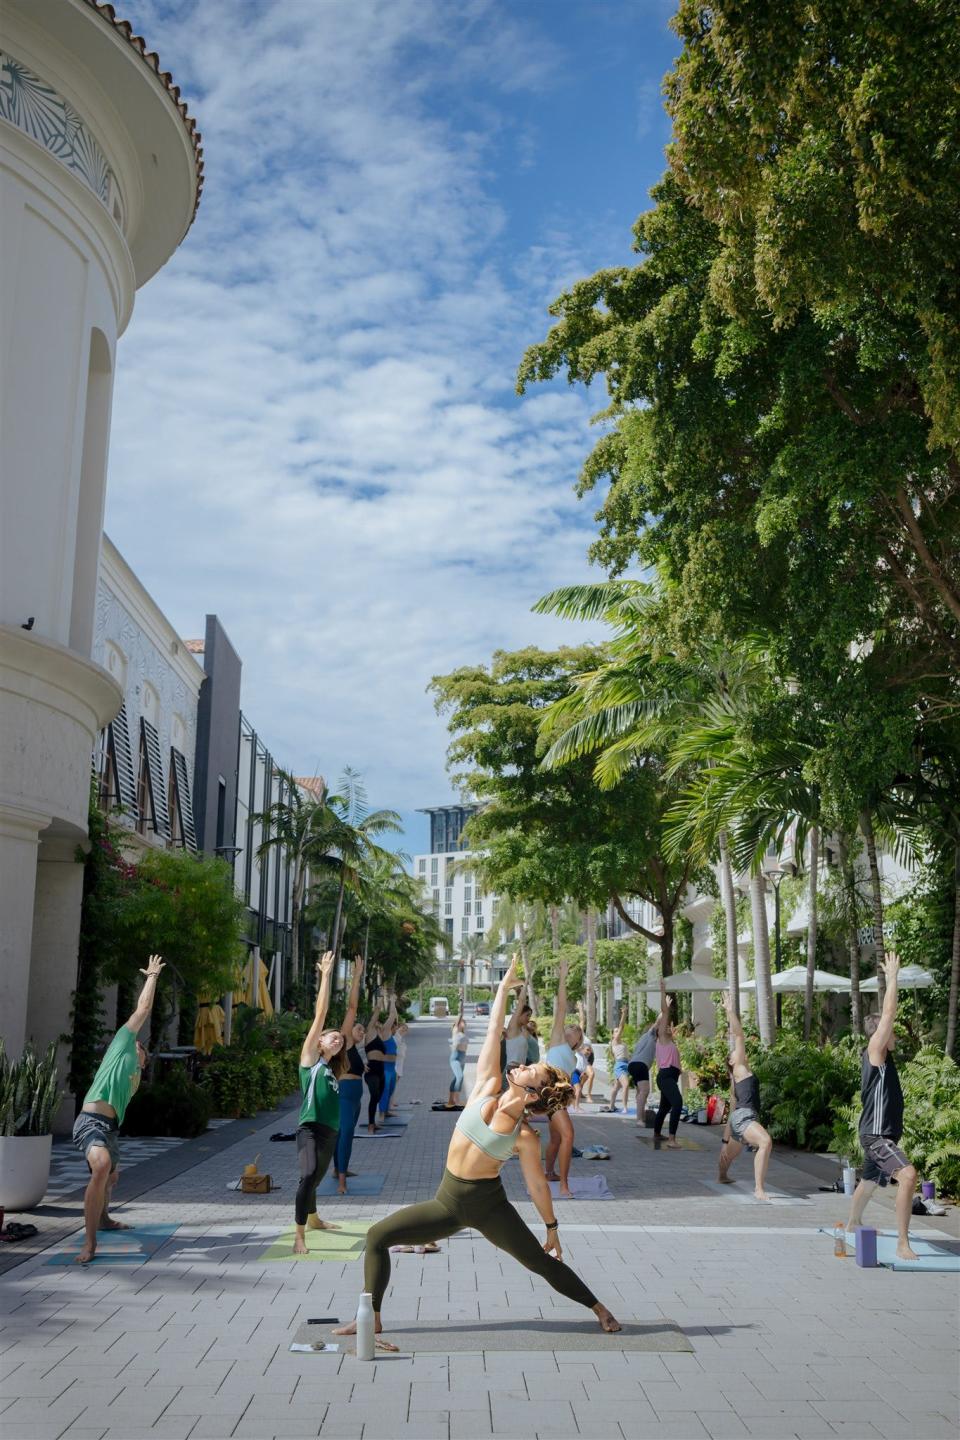 Stretch, strengthen and lengthen on Saturday, May 4 during yoga at CityPlace.